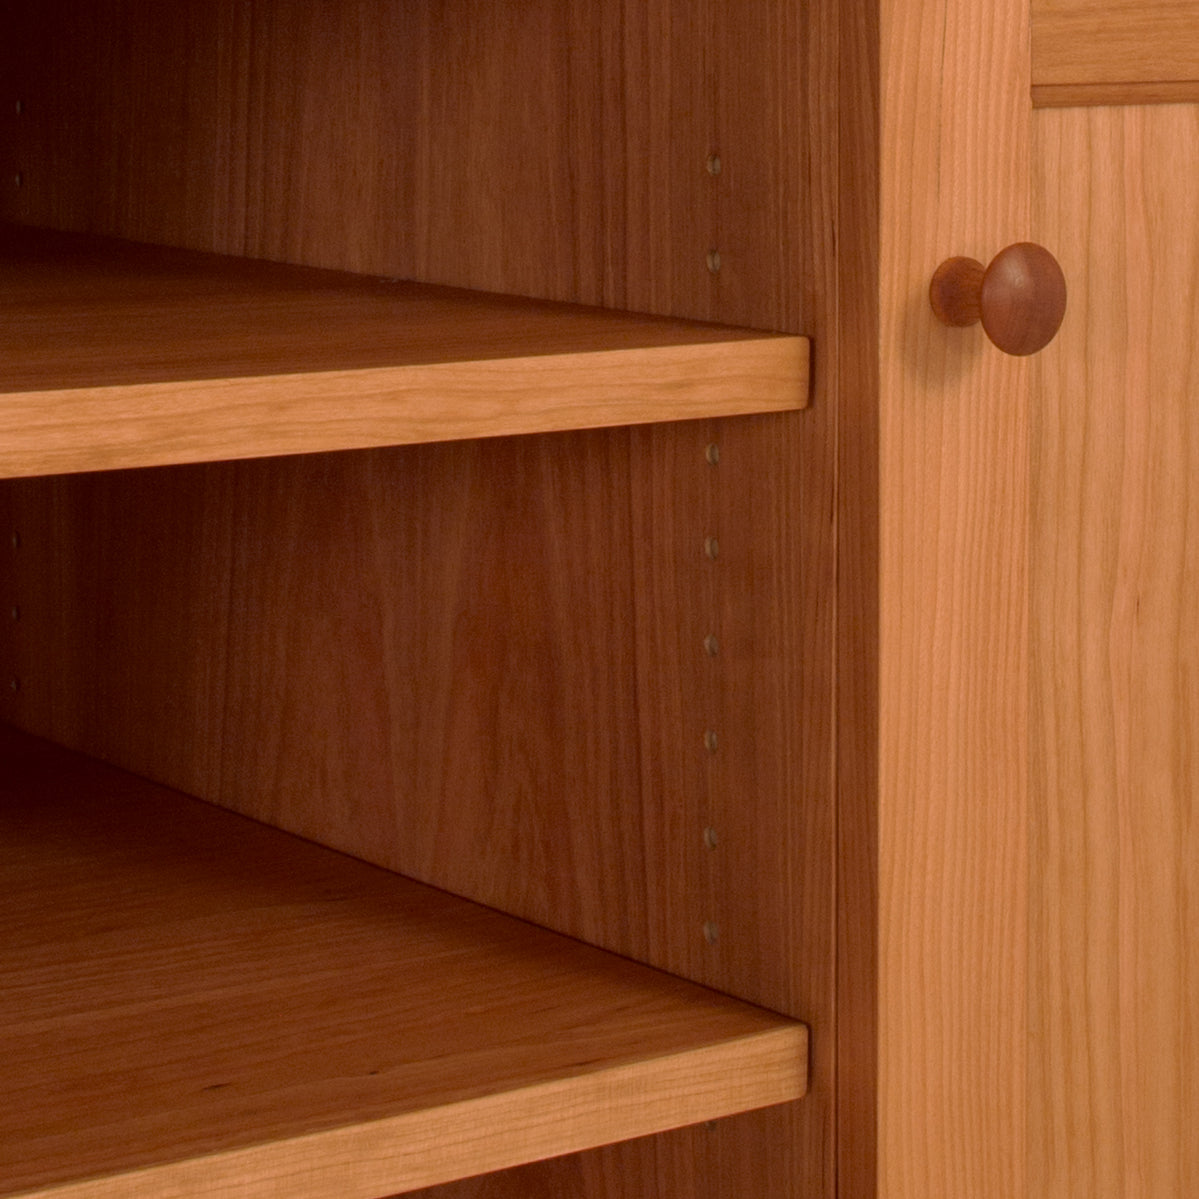 Close-up of an open American Shaker 67" TV Stand crafted from solid hardwoods by Maple Corner Woodworks, with empty shelves that spotlight the natural wood texture and visible pegs for adjusting shelf height.